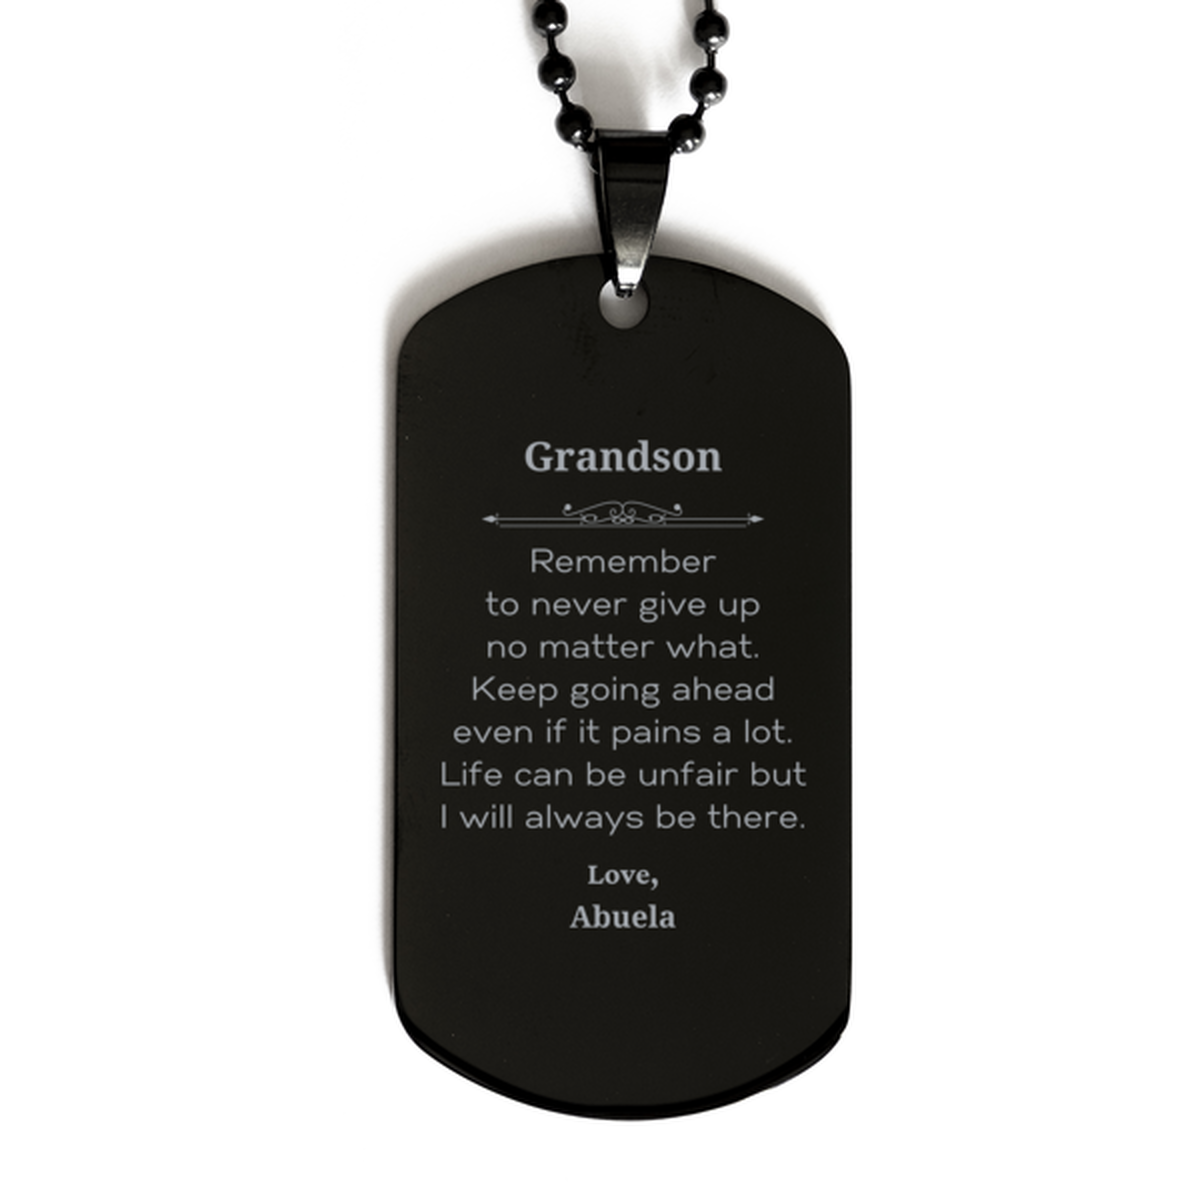 Grandson Motivational Gifts from Abuela, Remember to never give up no matter what, Inspirational Birthday Black Dog Tag for Grandson